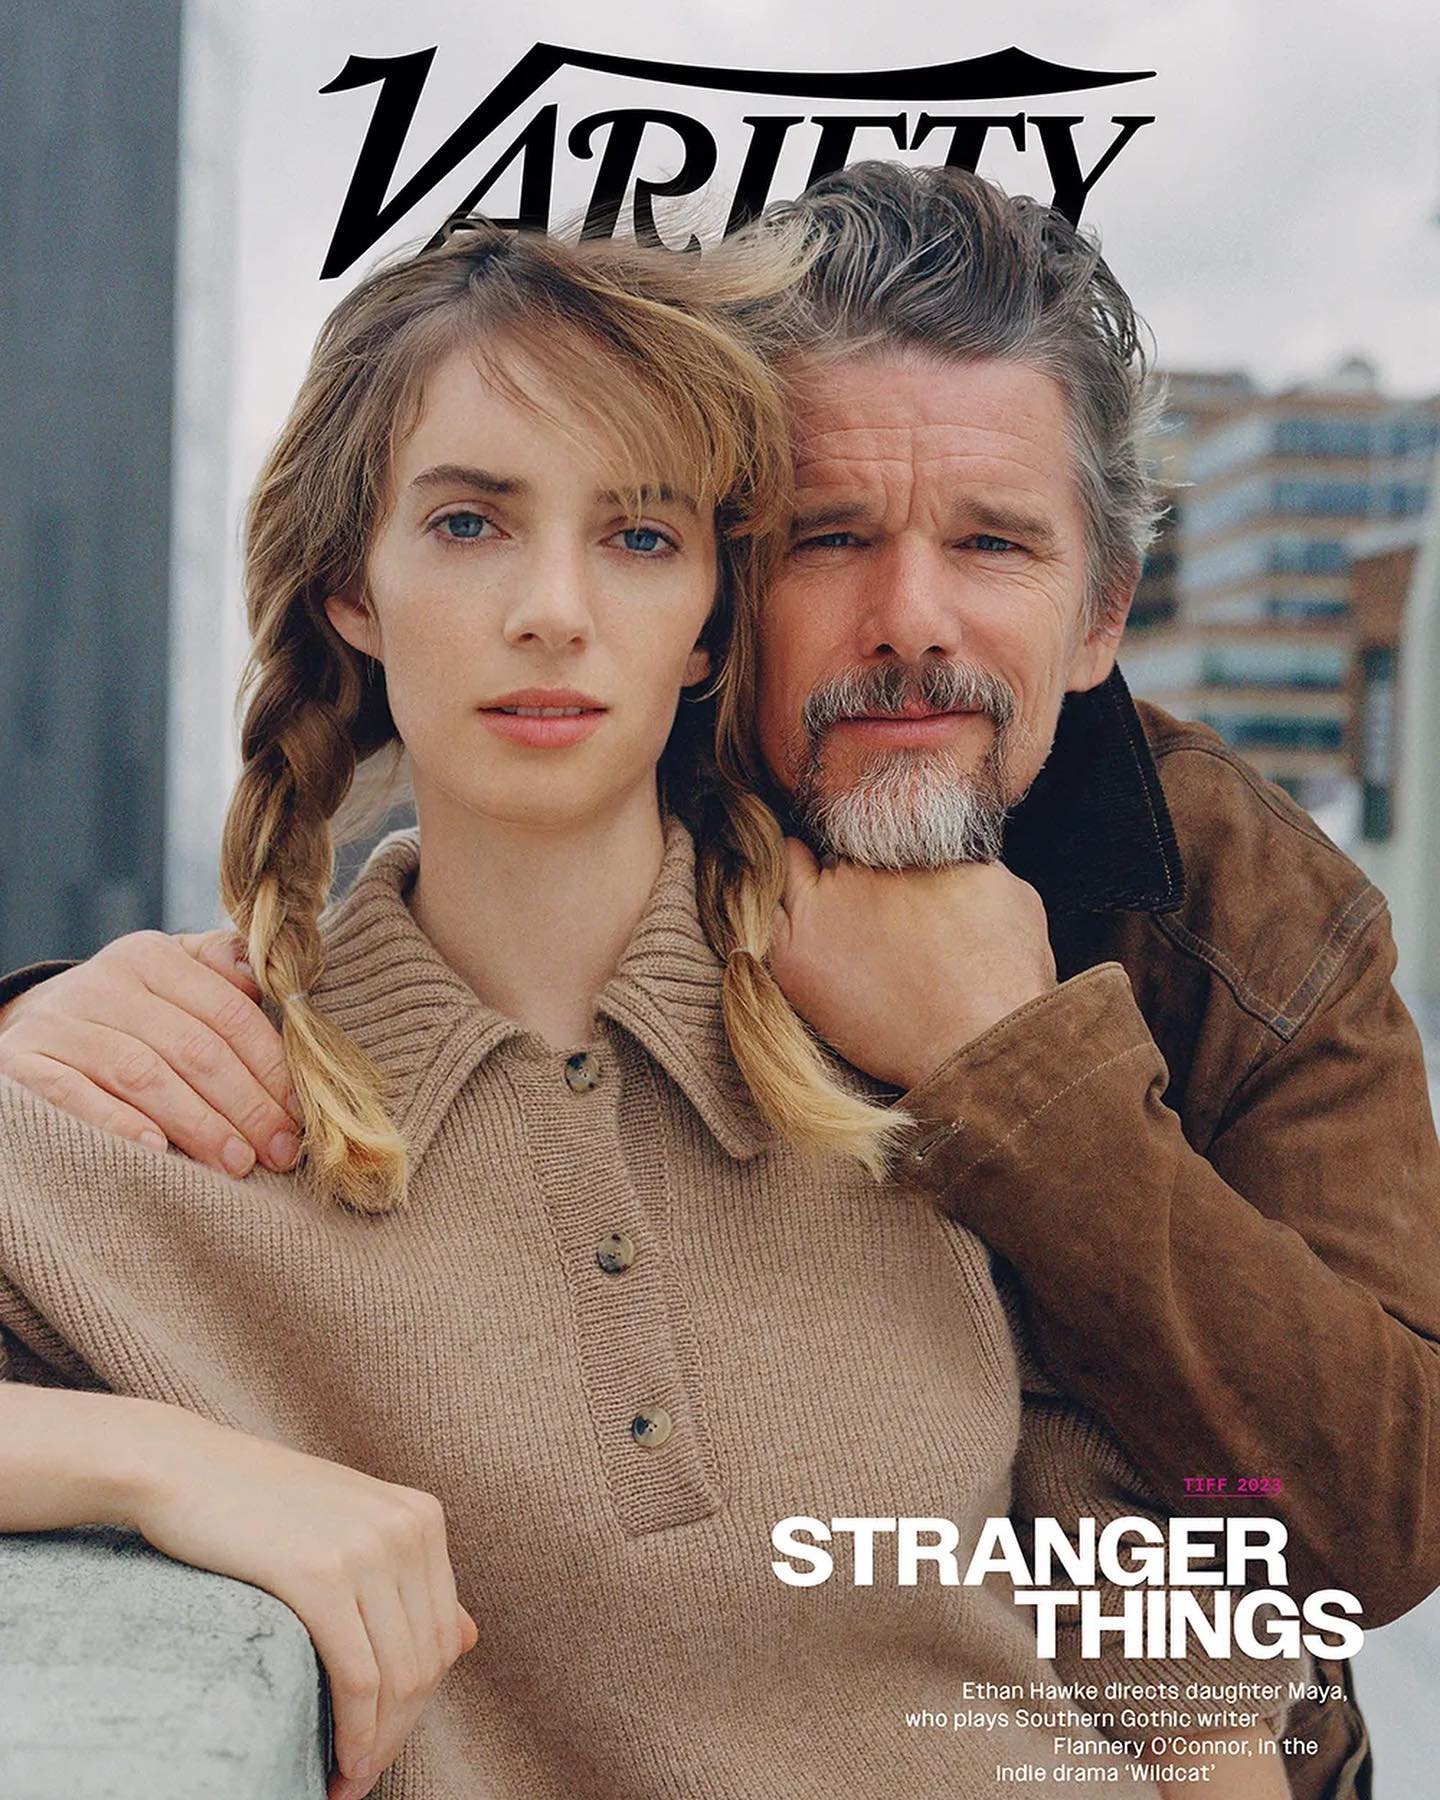 Shot at Corner Studio | Ethan and Maya Hawke for the cover of Variety Magazine by @heatherhazzan 

Video and video stills by @graykohs